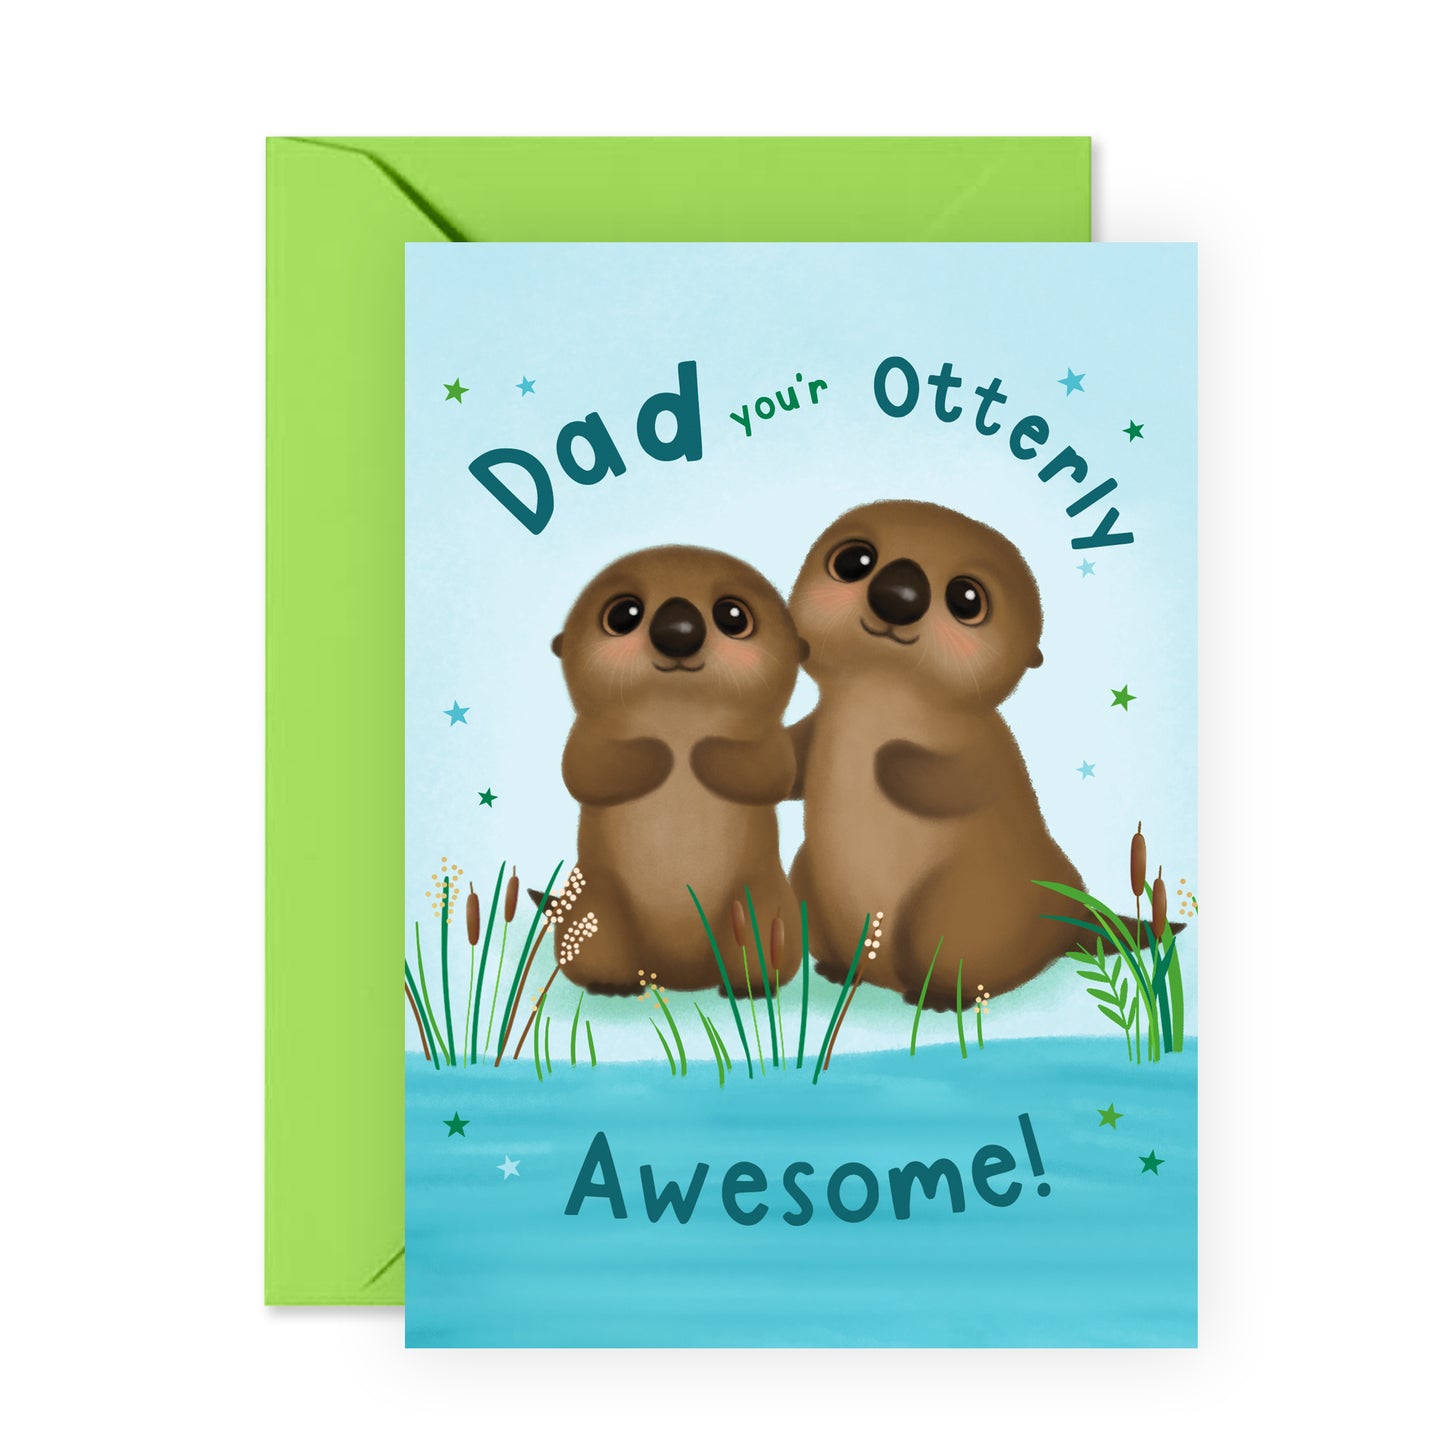 Dad Birthday Card - You're Otterly Awesome - For Men Him